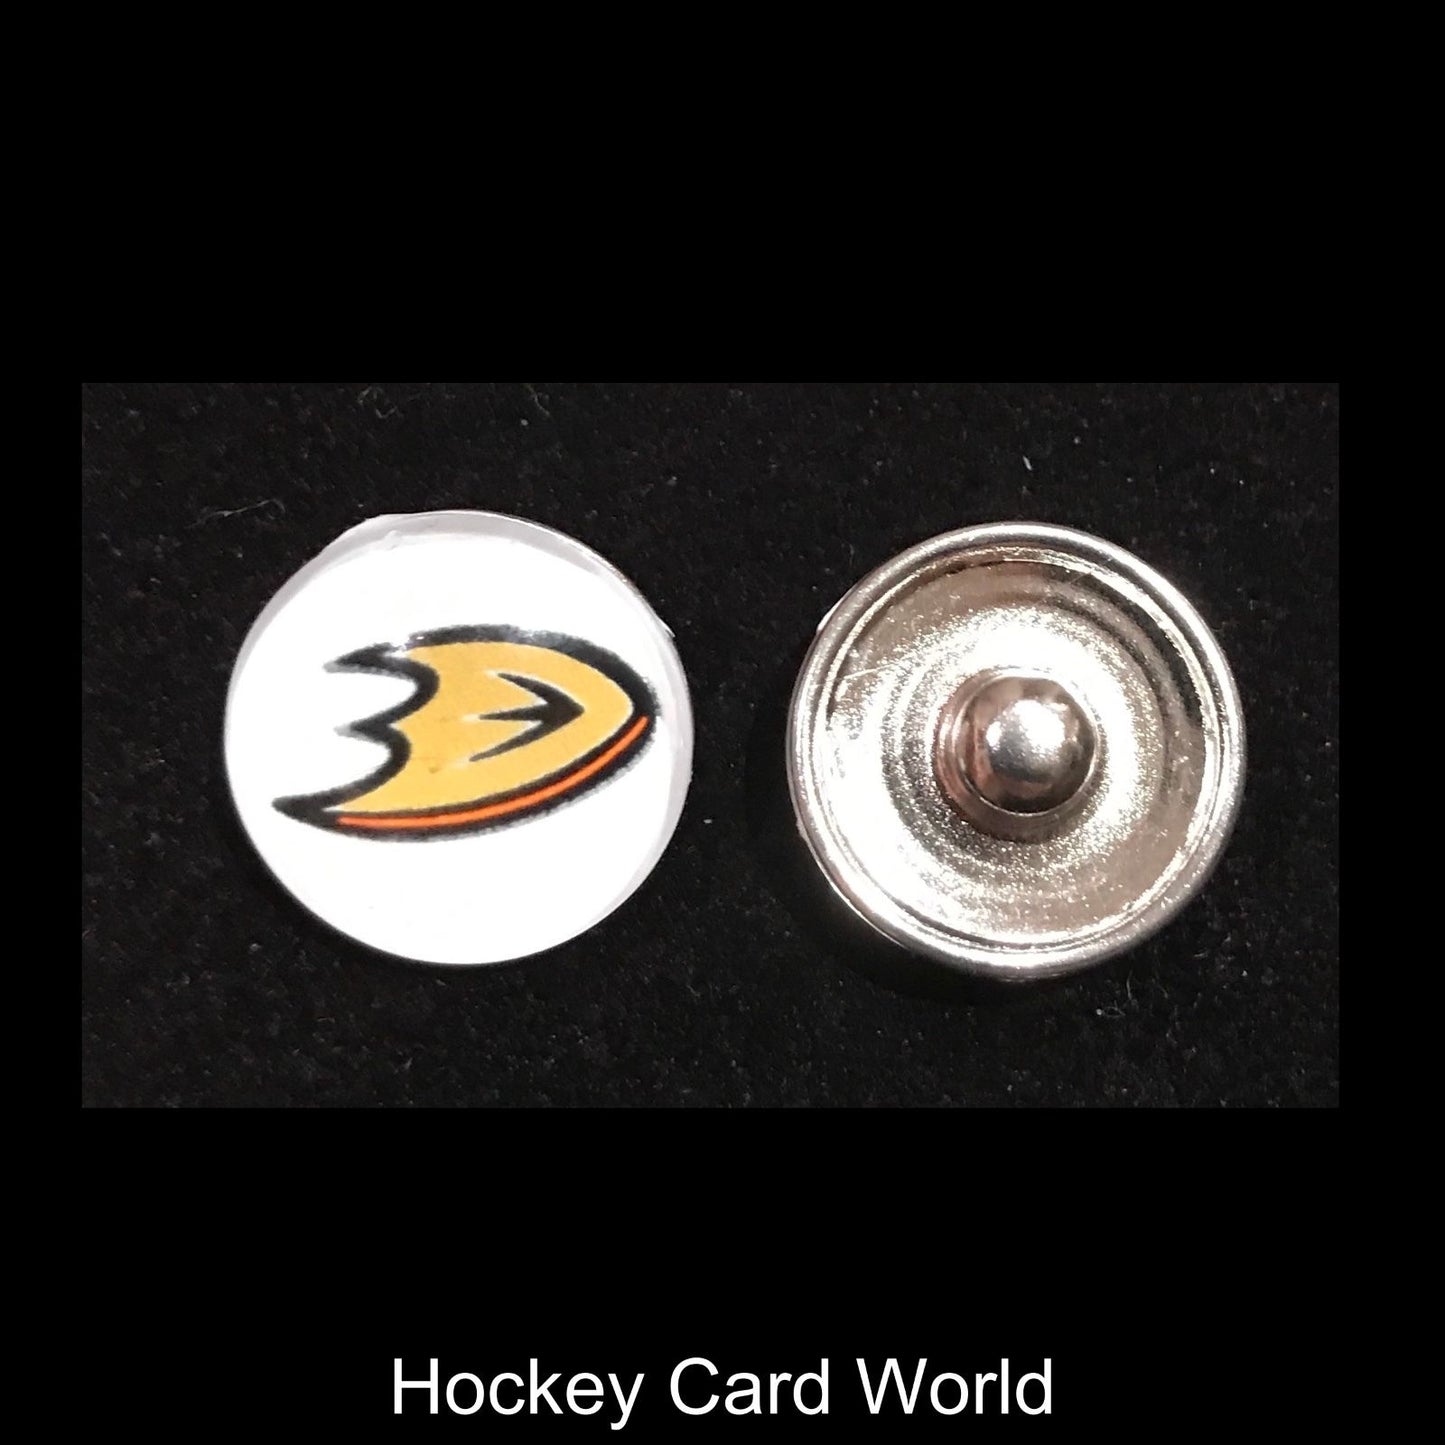  Anaheim Ducks NHL Snap Ginger Button Jewelry for Jackets, Bracelets. Image 1